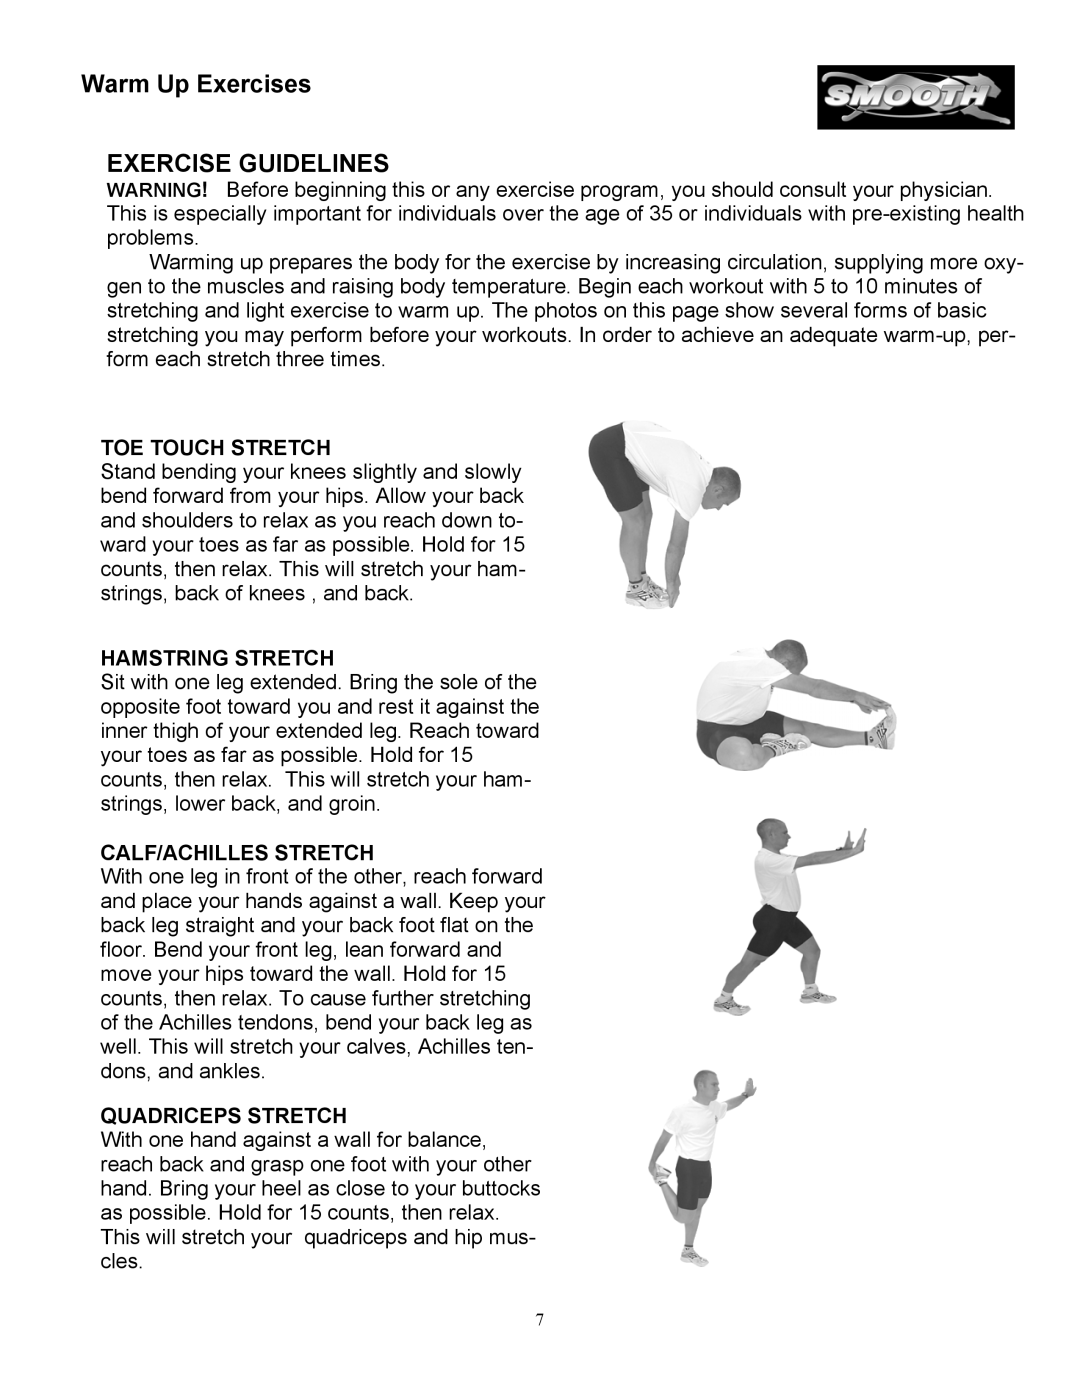 Smooth Fitness SM9.3ST, SM9.3P, SM9.3HRST, SM9.3AB, SM9.3HRAB owner manual Warm Up Exercises, Exercise Guidelines 